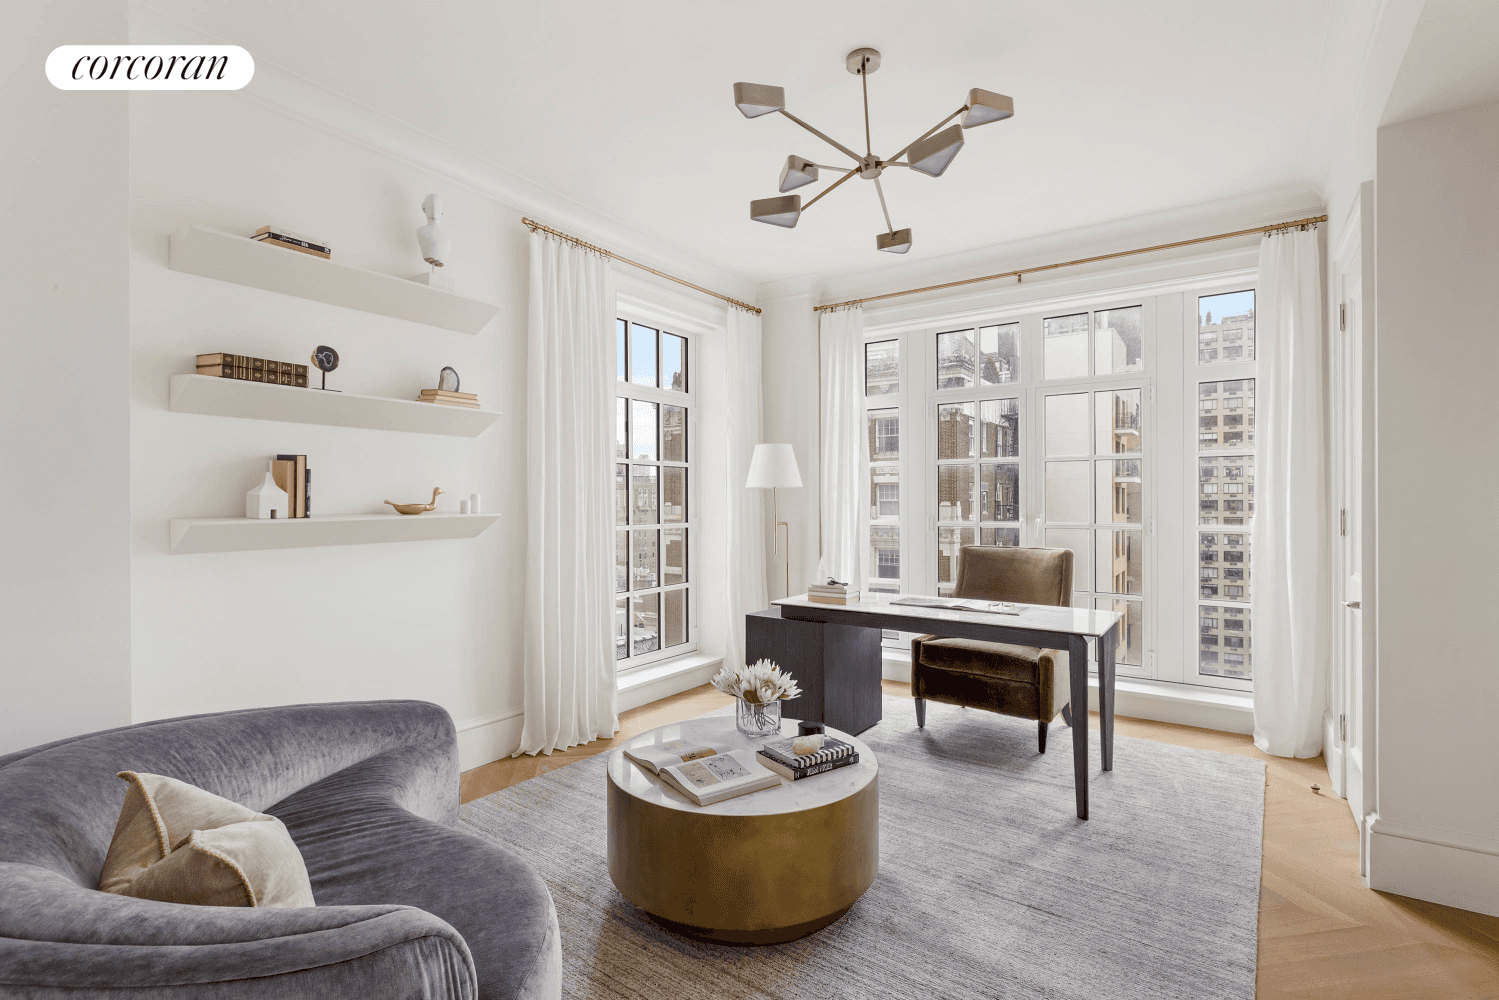 The Benson, 1045 Madison Avenue, 14th Floor Sophisticated Living on Madison Avenue 5 Bedrooms 4.